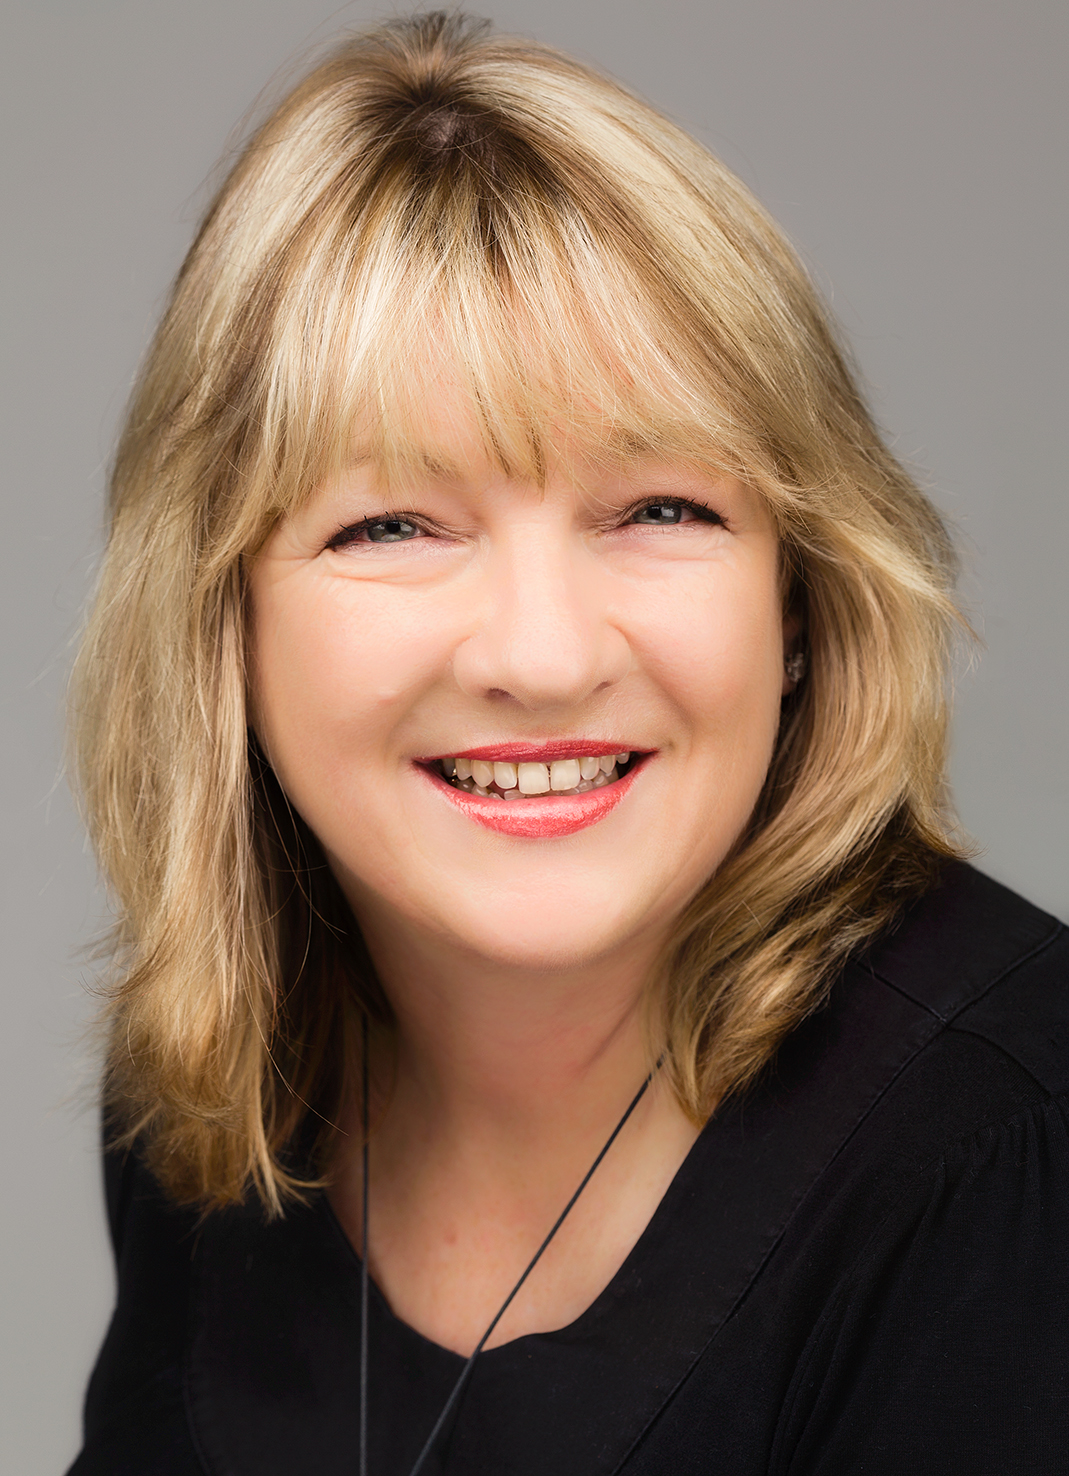 PSB’s Donna Smith celebrates 25 years in the professional beauty industry